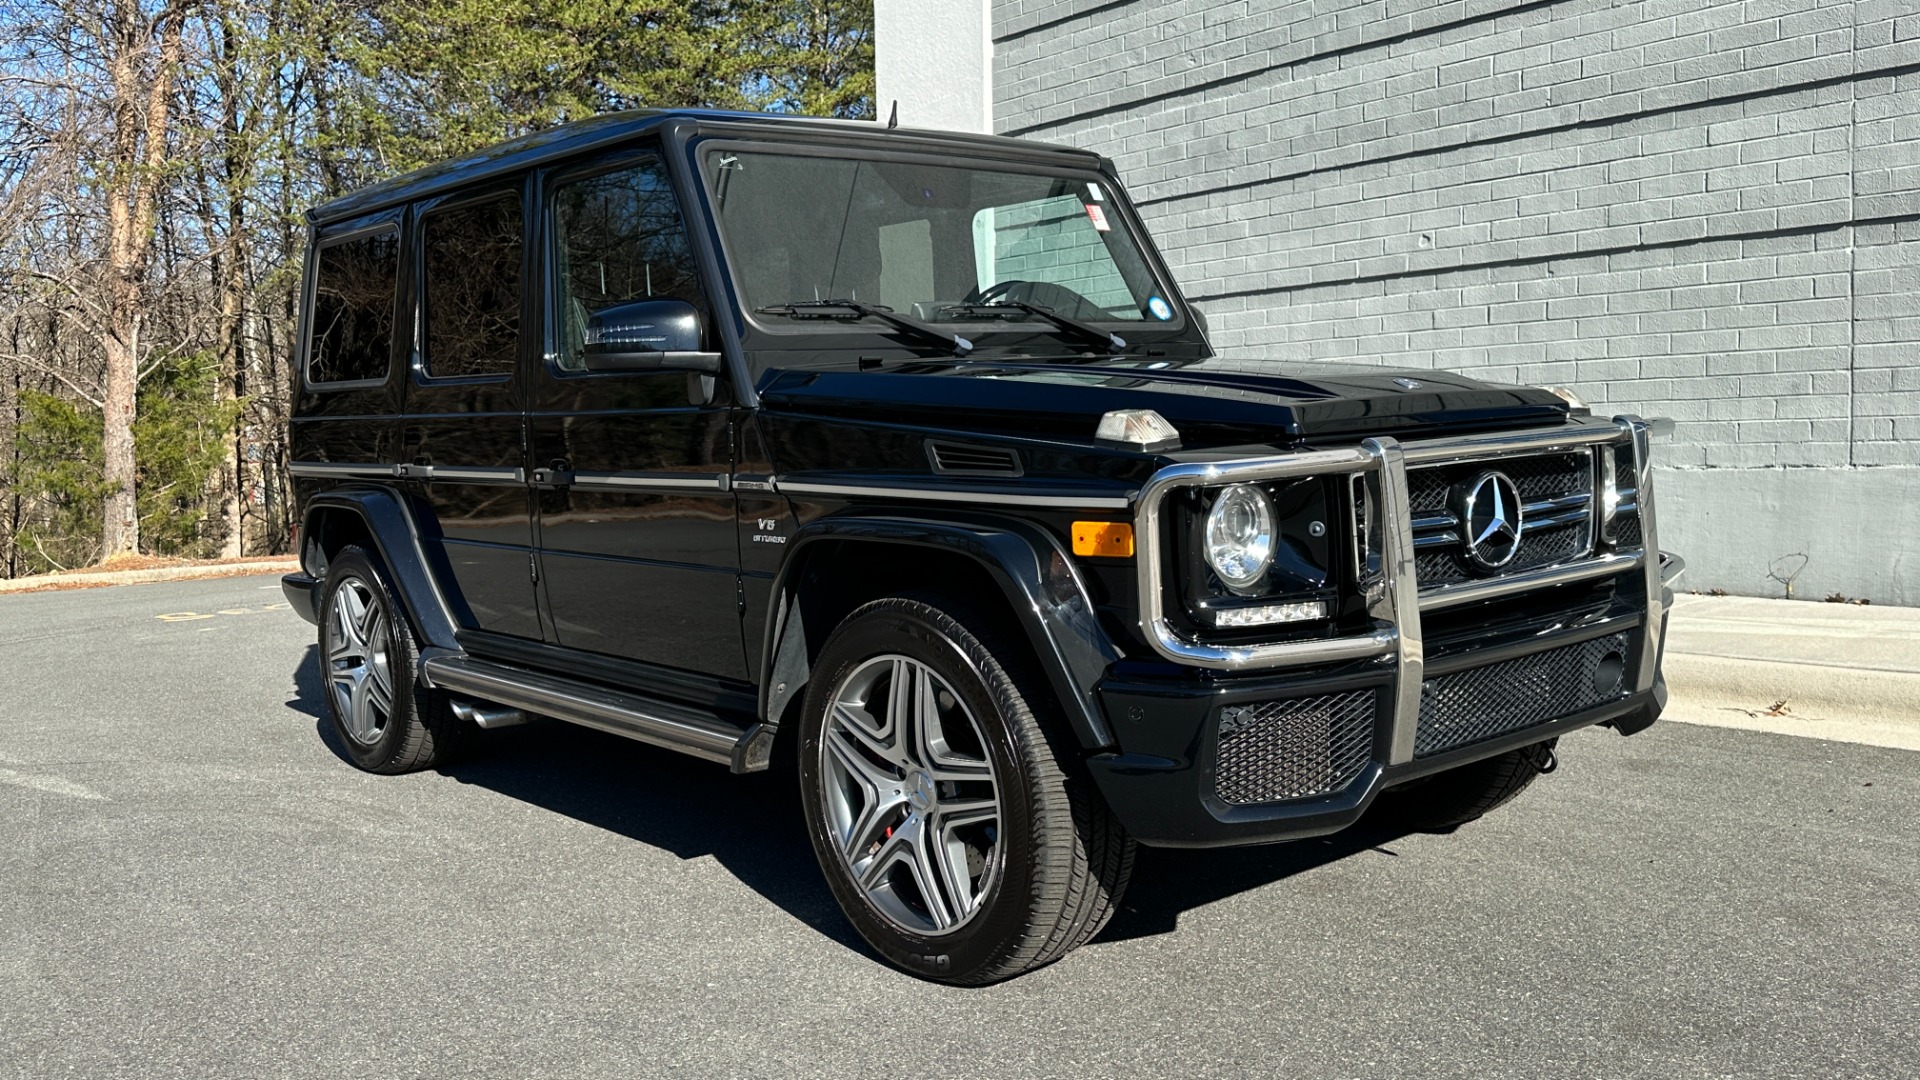 Used 2013 Mercedes-Benz G-Class G63 AMG / DESIGNO INTERIOR / DESIGNO TRIM / 20IN AMG WHEELS for sale $74,995 at Formula Imports in Charlotte NC 28227 5